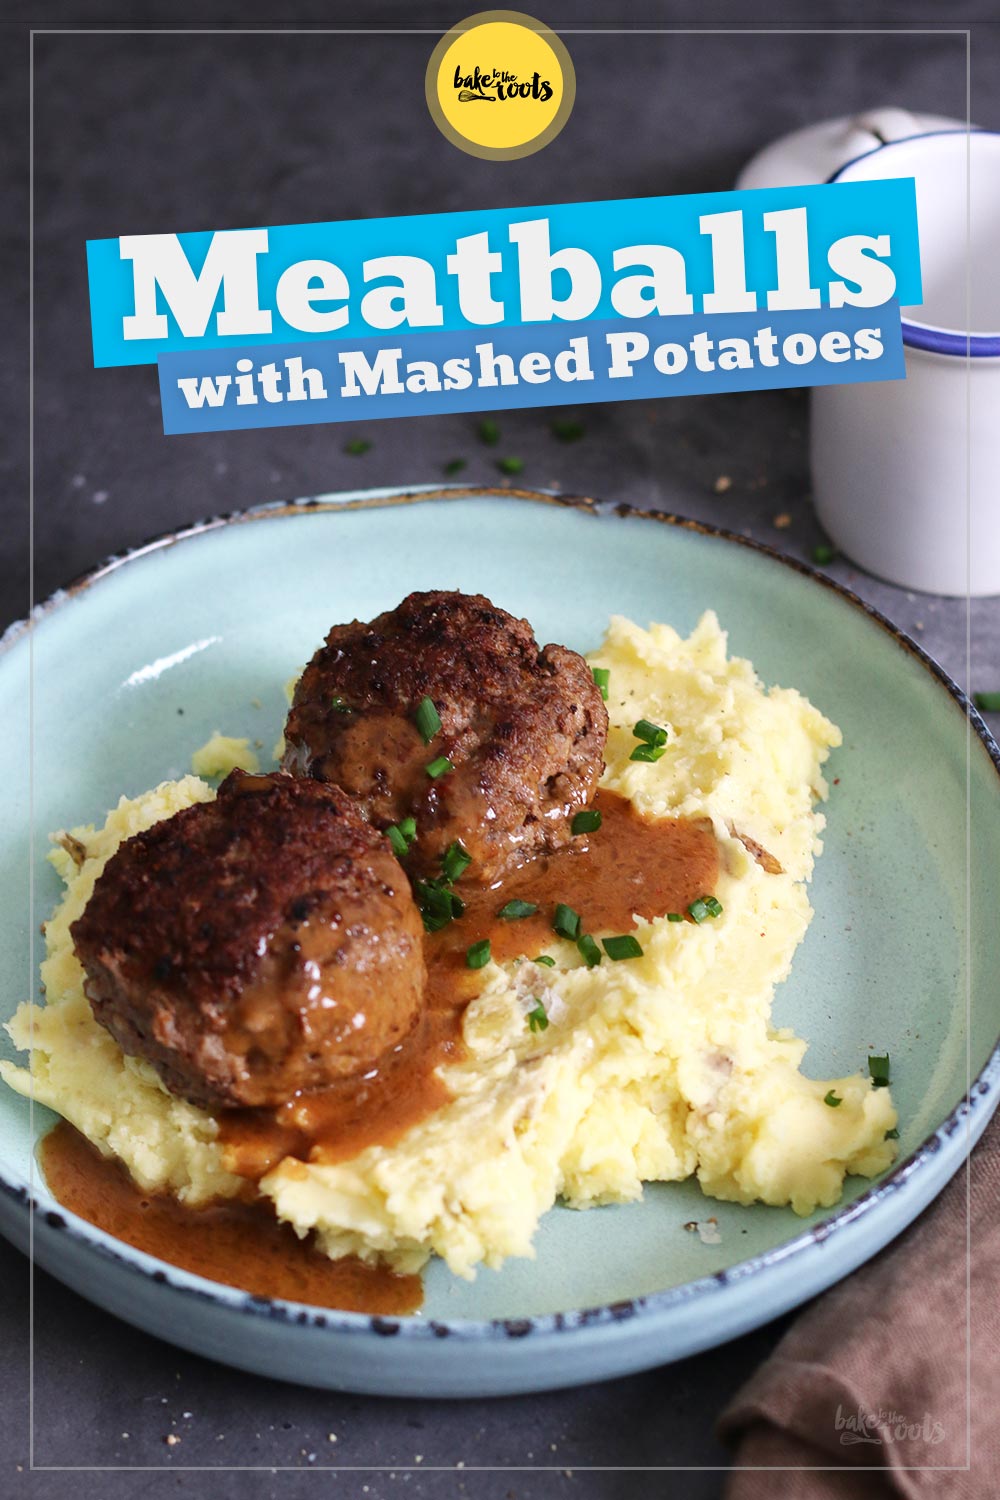 Meatballs with Mashed Potatoes | Bake to the roots